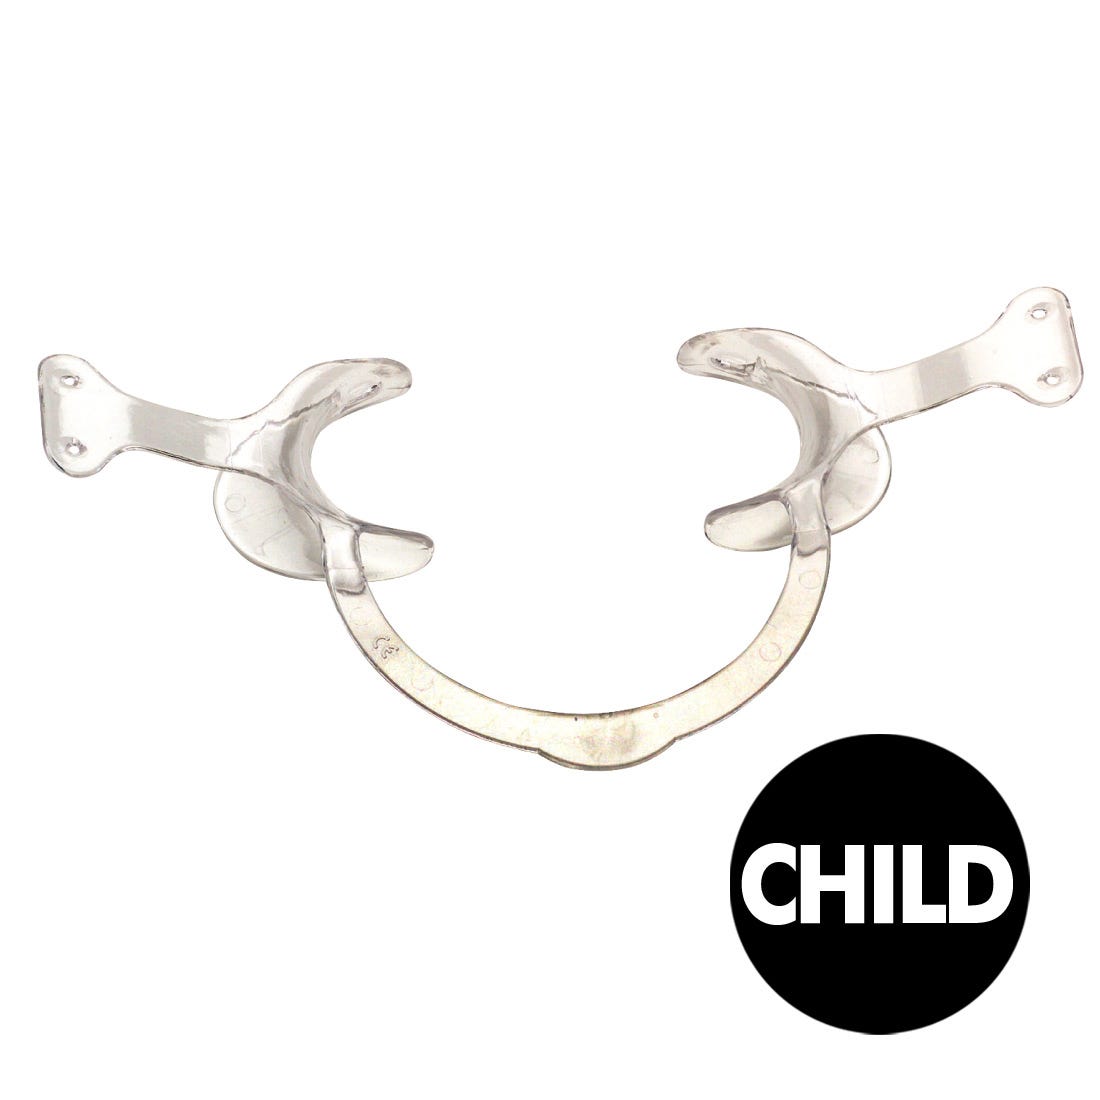 ACE Autoclavable Self Spanning Lip/Cheek Retractor with holders, child, 35mm